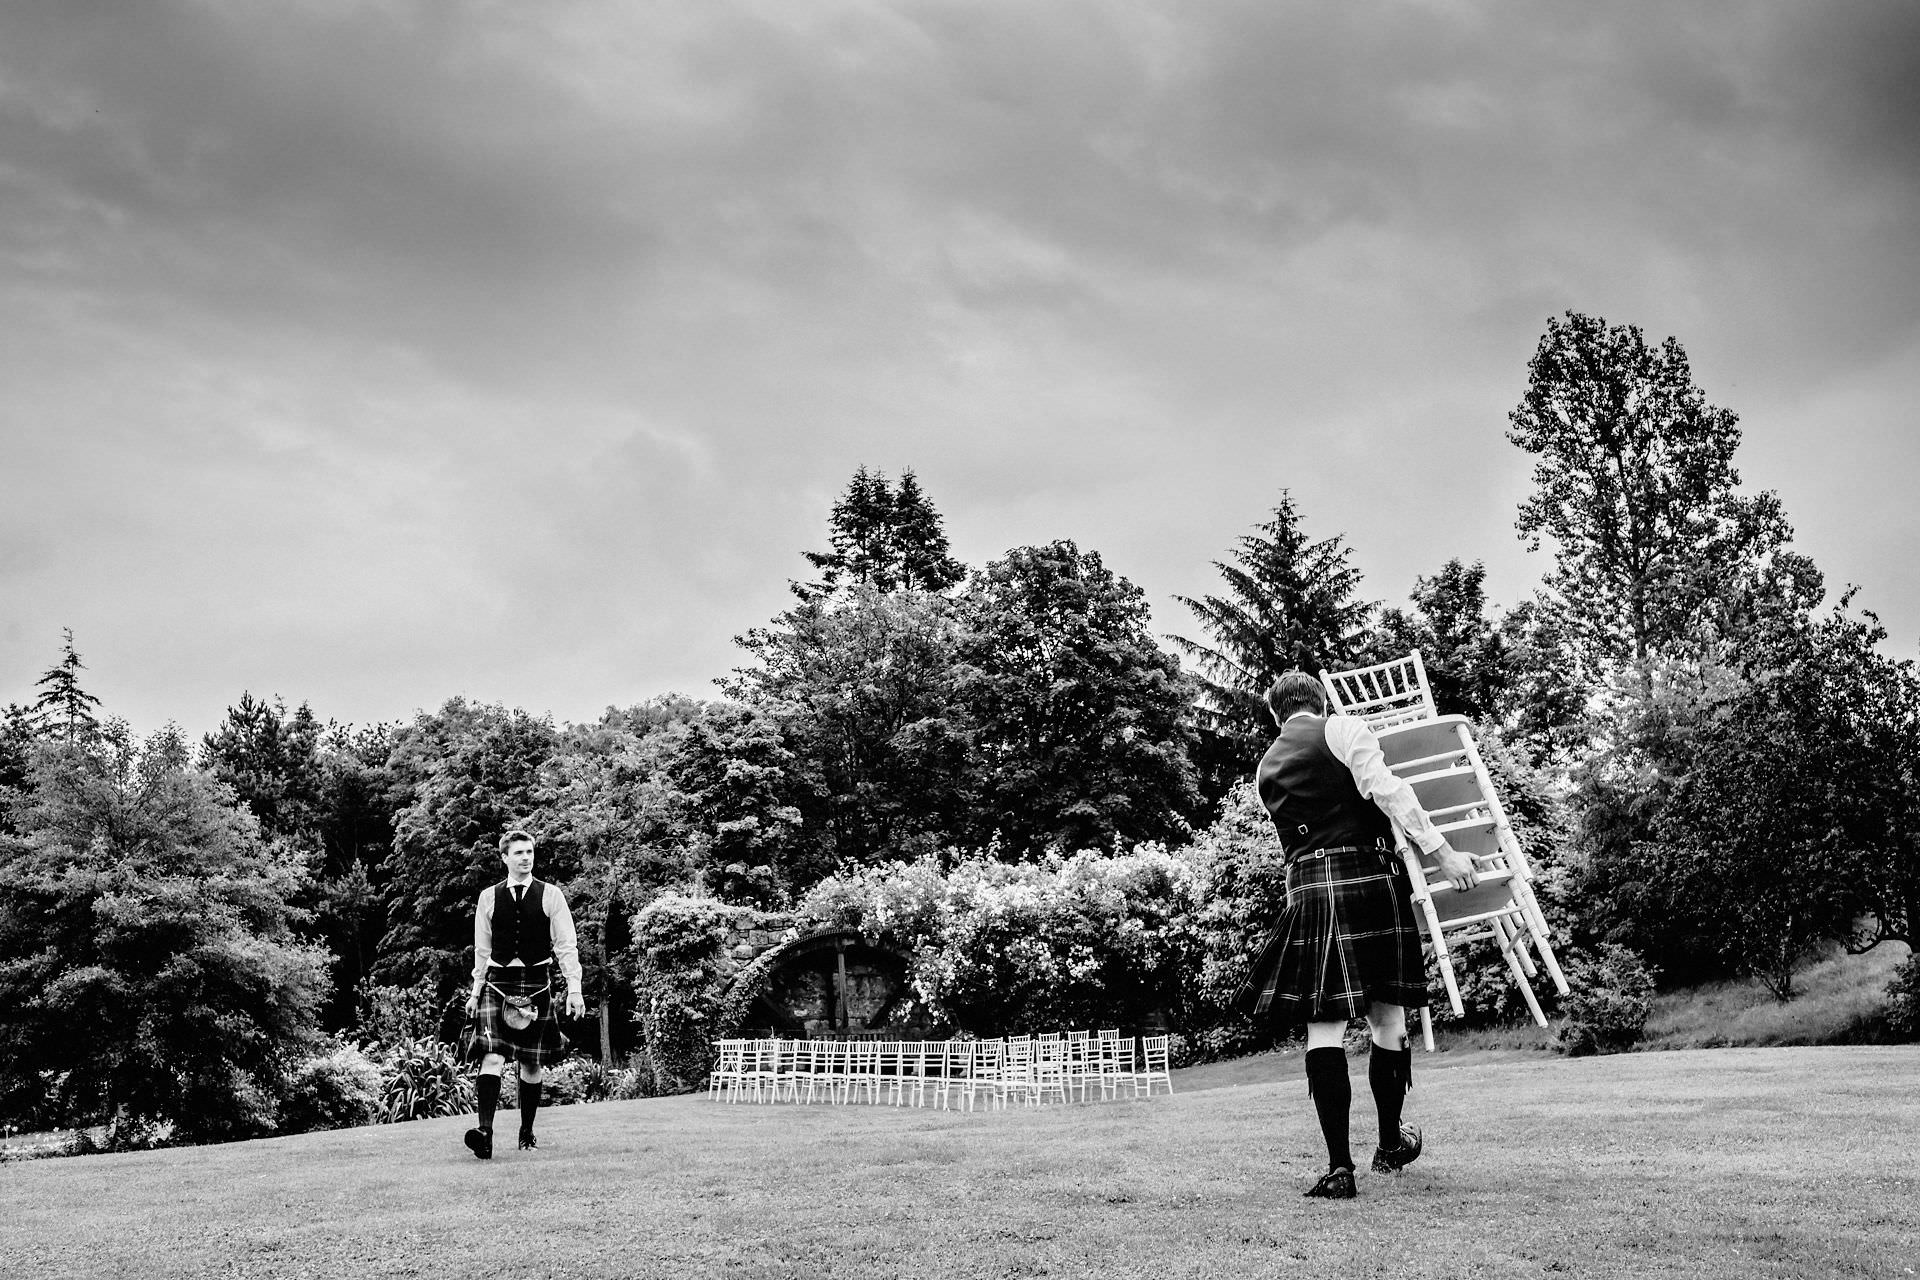 carrying chairs for the humanist ceremony in the garden